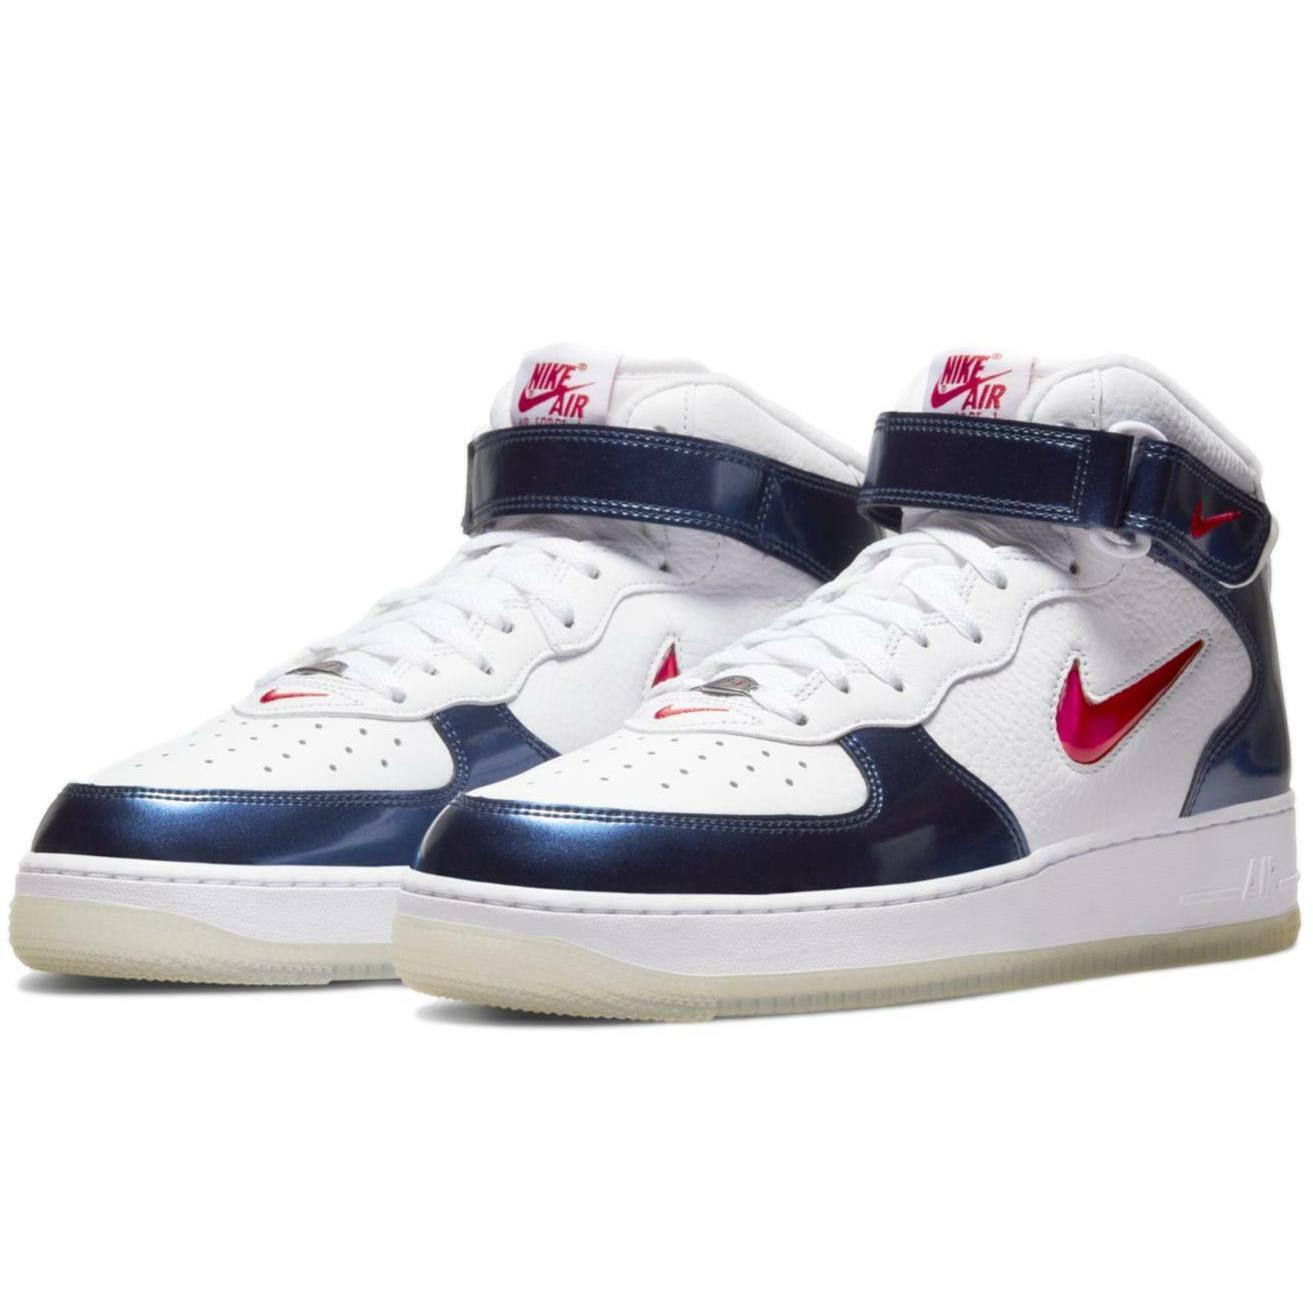 Nike Men`s Air Force 1 Mid QS `independence Day` Shoes Sneakers DH5623-101 - White/University Red